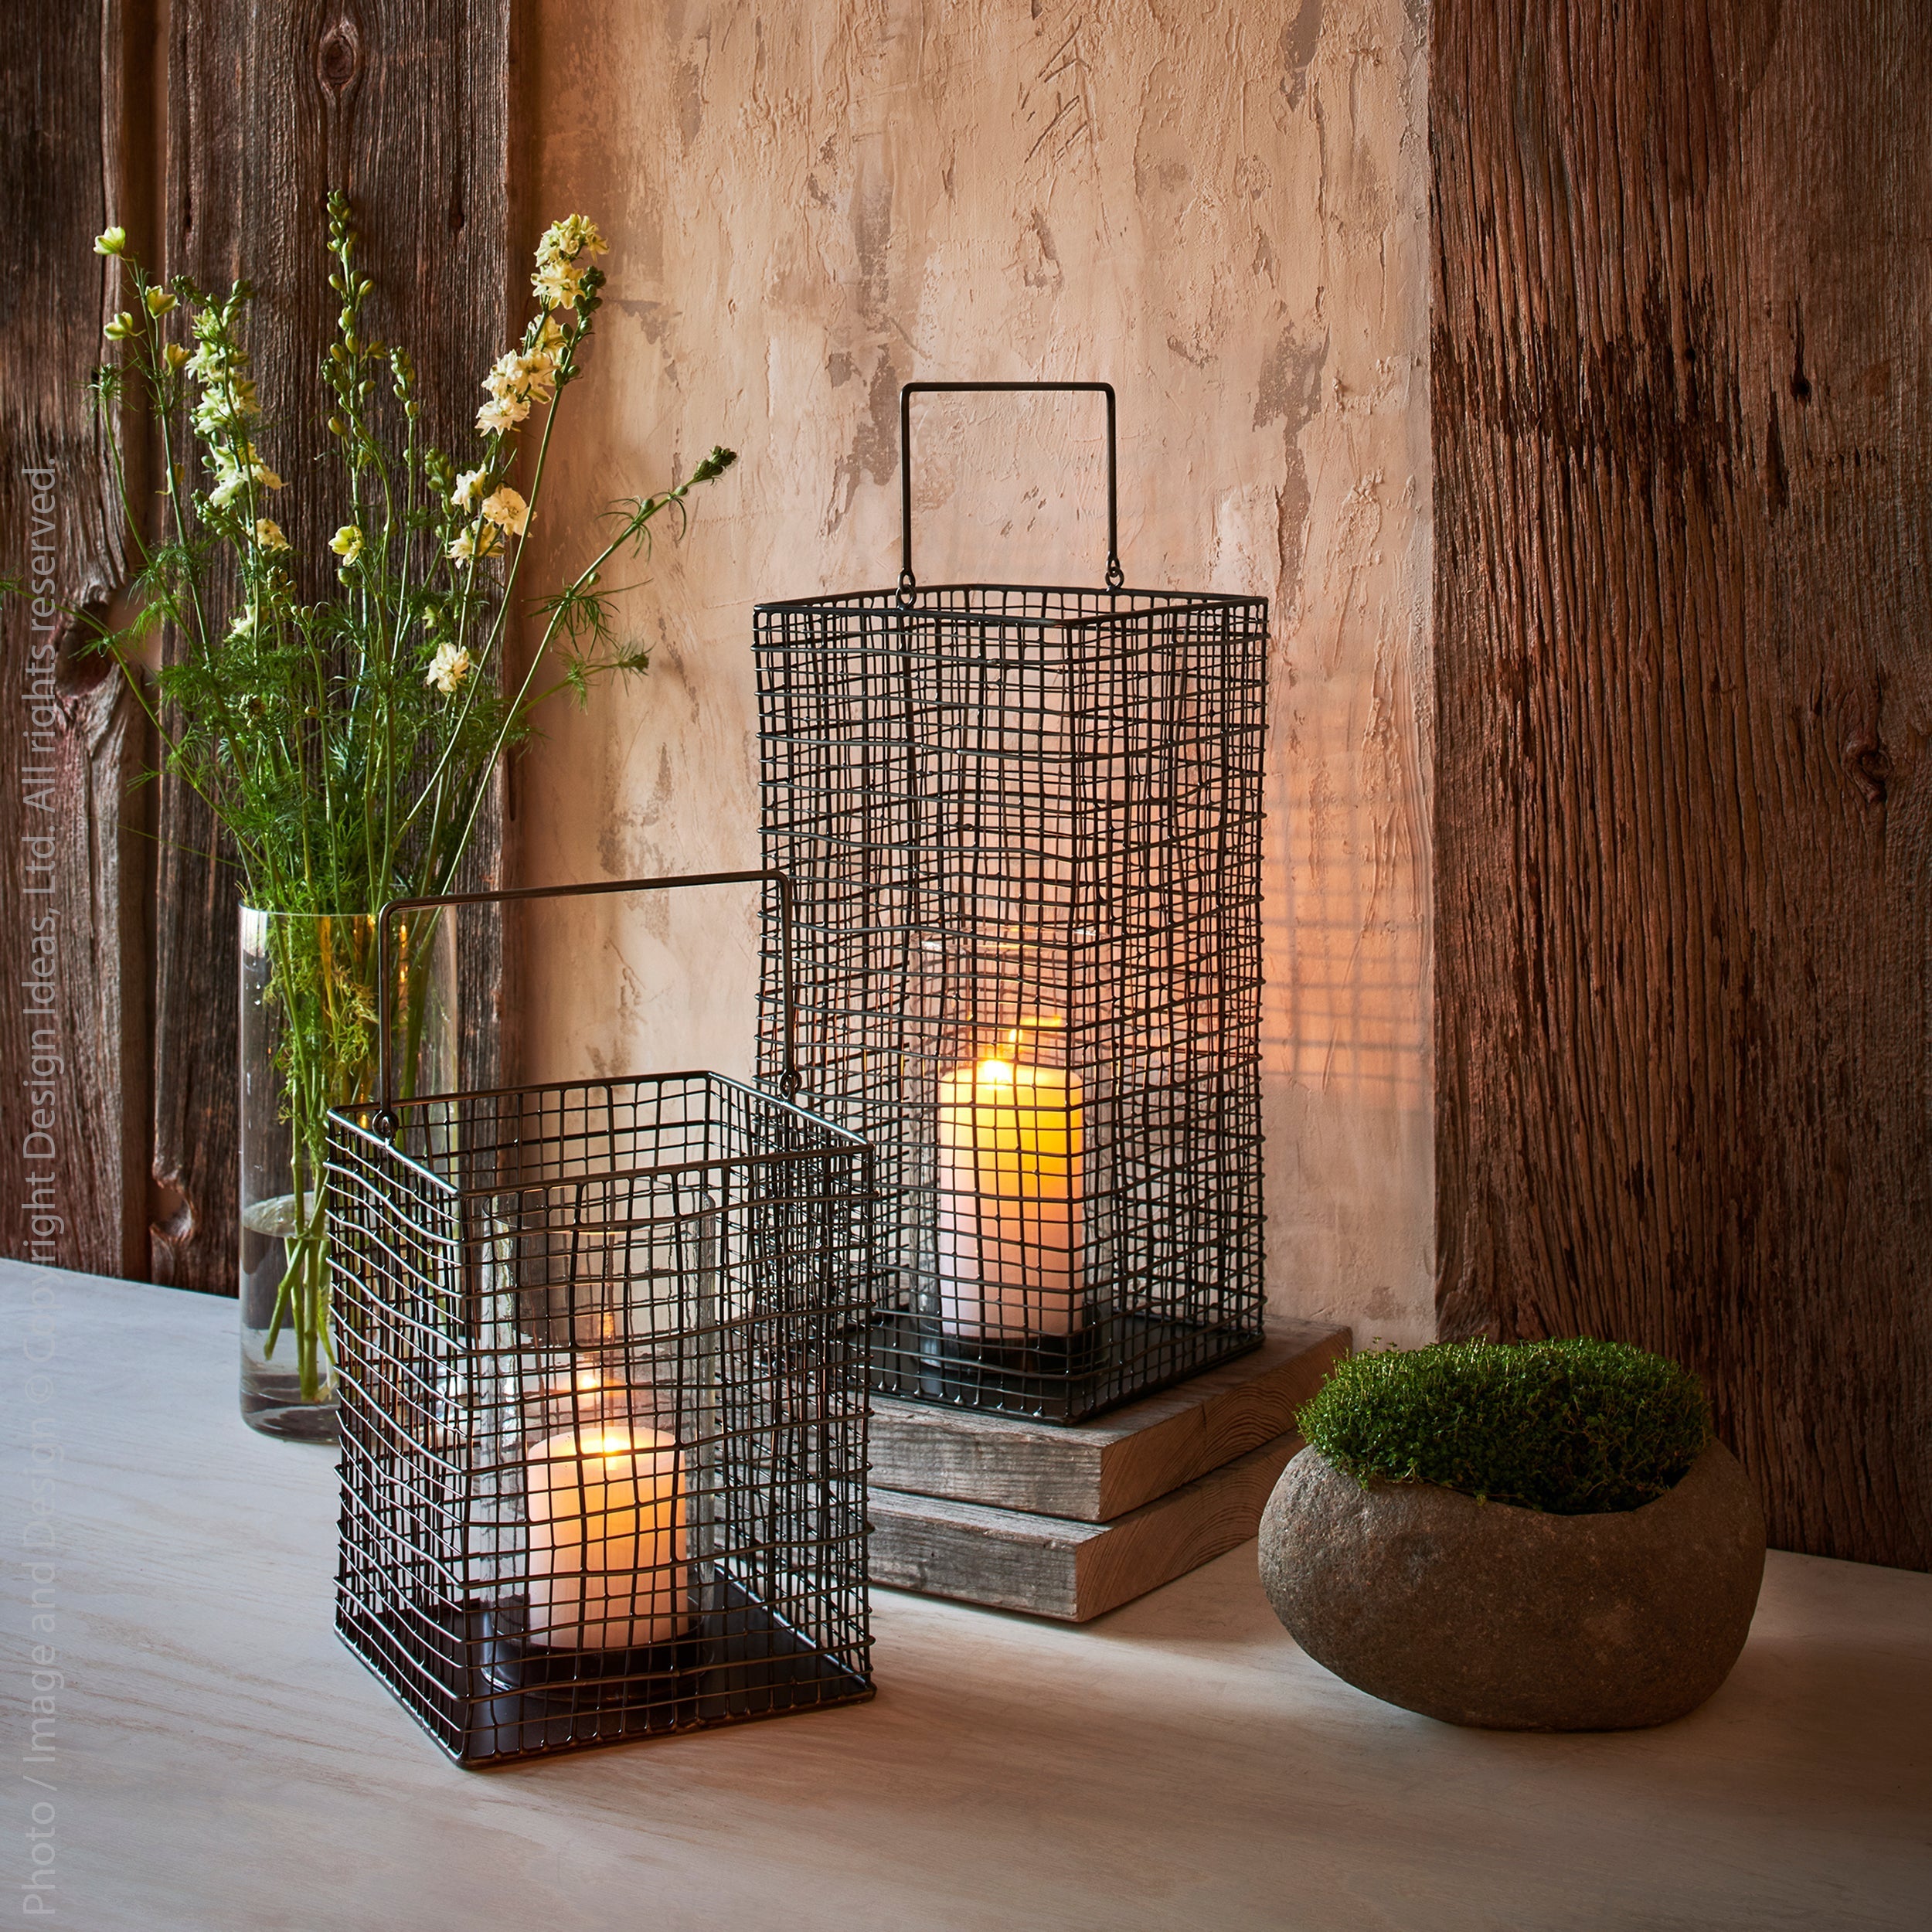 Trellis Glass Lantern (Tall) Clear Color | Image 2 | From the Trellis Collection | Expertly crafted with natural glass for long lasting use | Available in clear color | texxture home